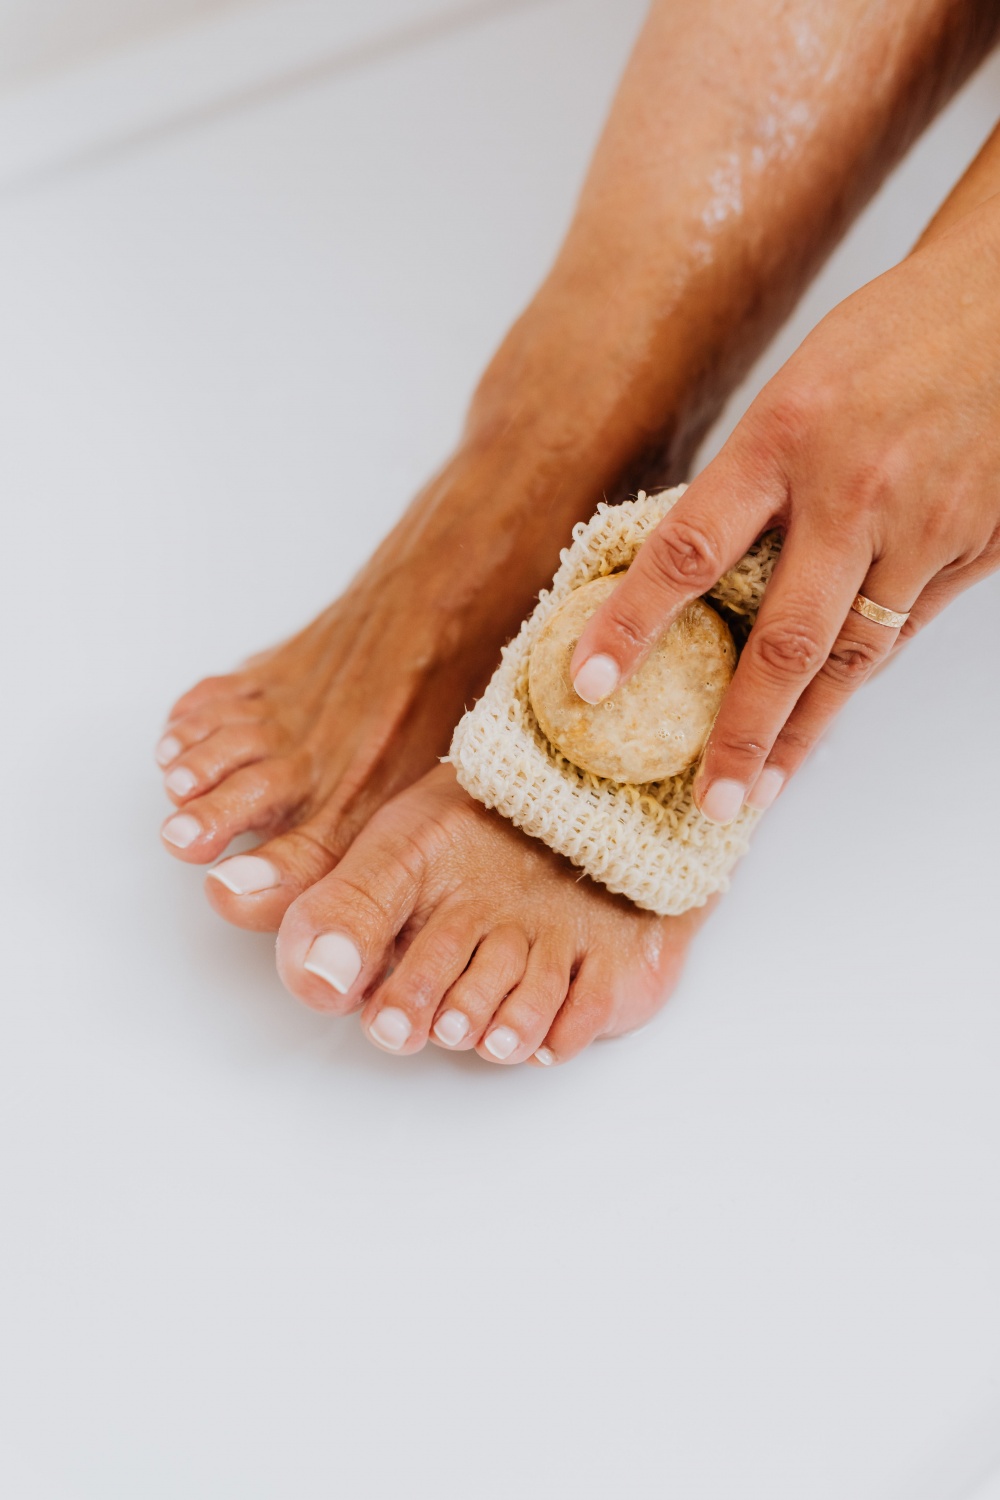 removing dead skin from feet 